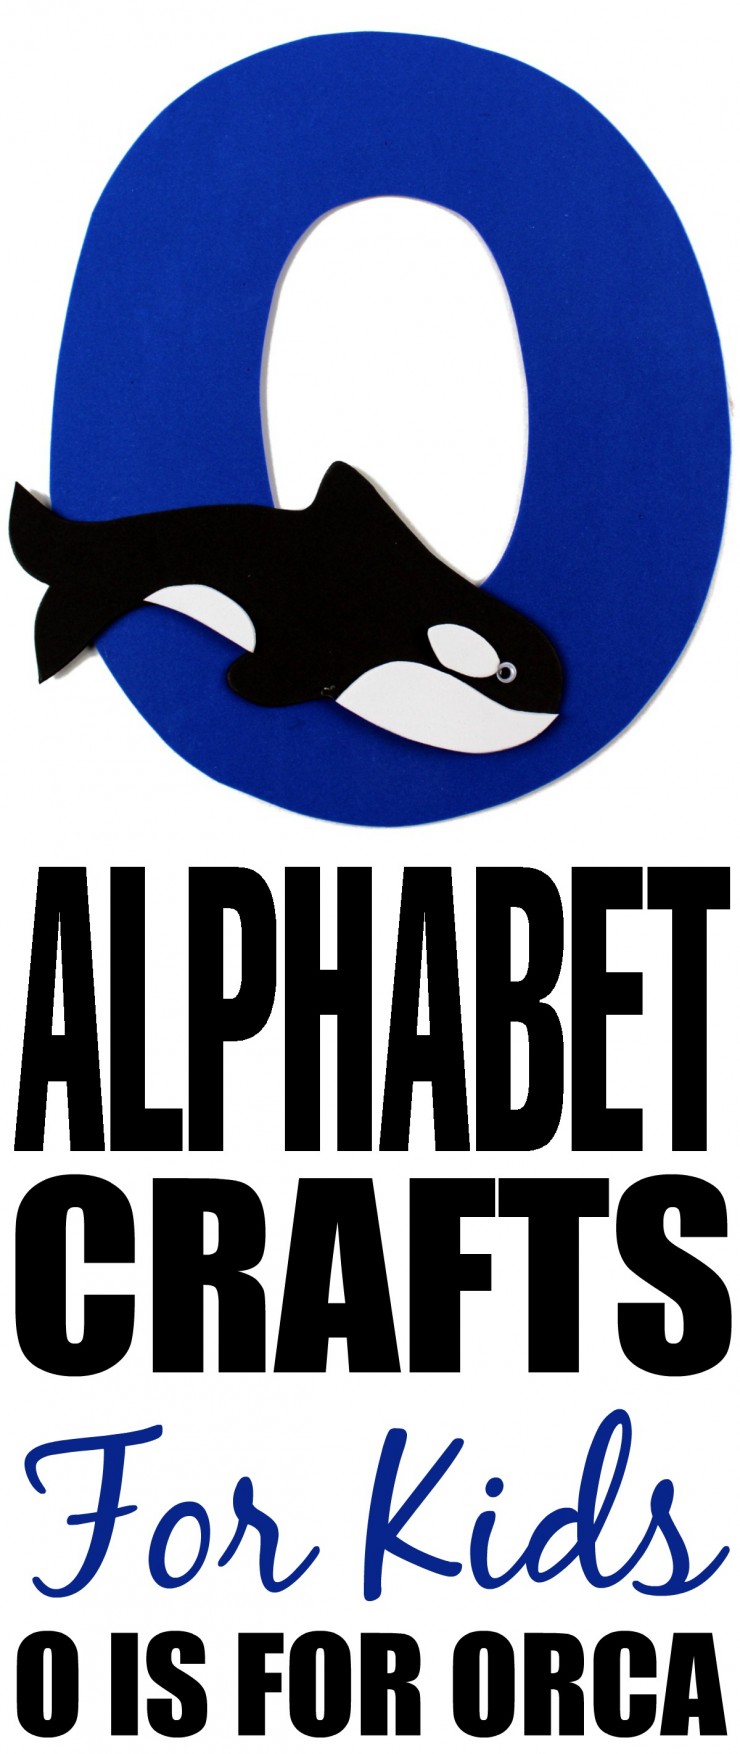 This week in my series of ABCs kids crafts featuring the Alphabet, we are doing a O is for Orca craft. These Alphabet Crafts For Kids are a fun way to introduce your child to the alphabet.